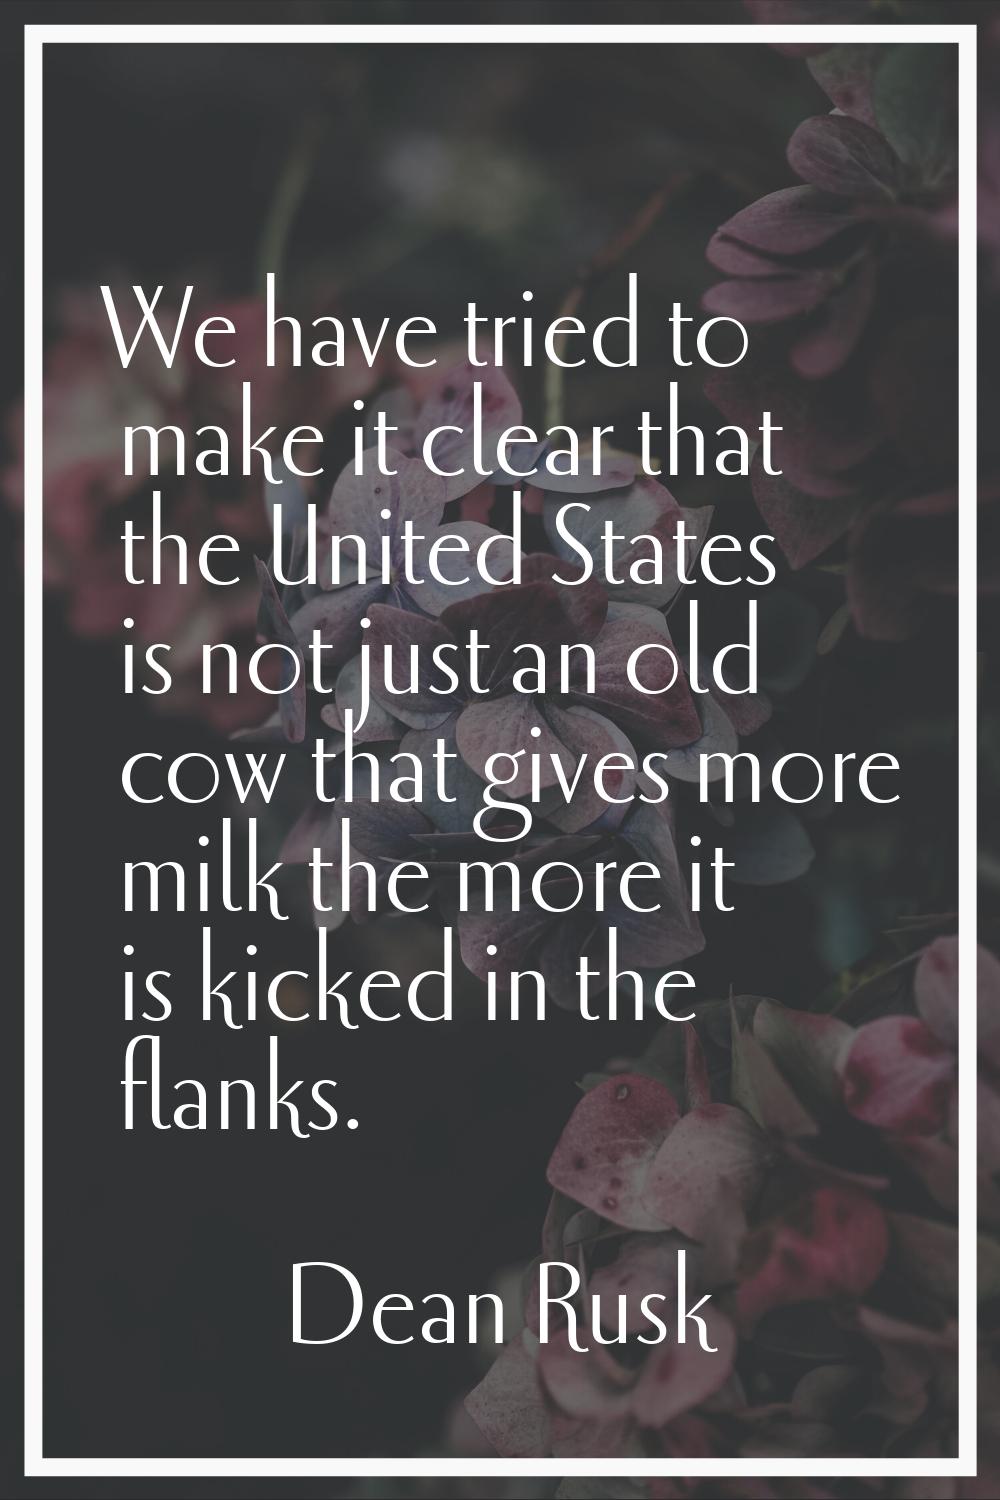 We have tried to make it clear that the United States is not just an old cow that gives more milk t